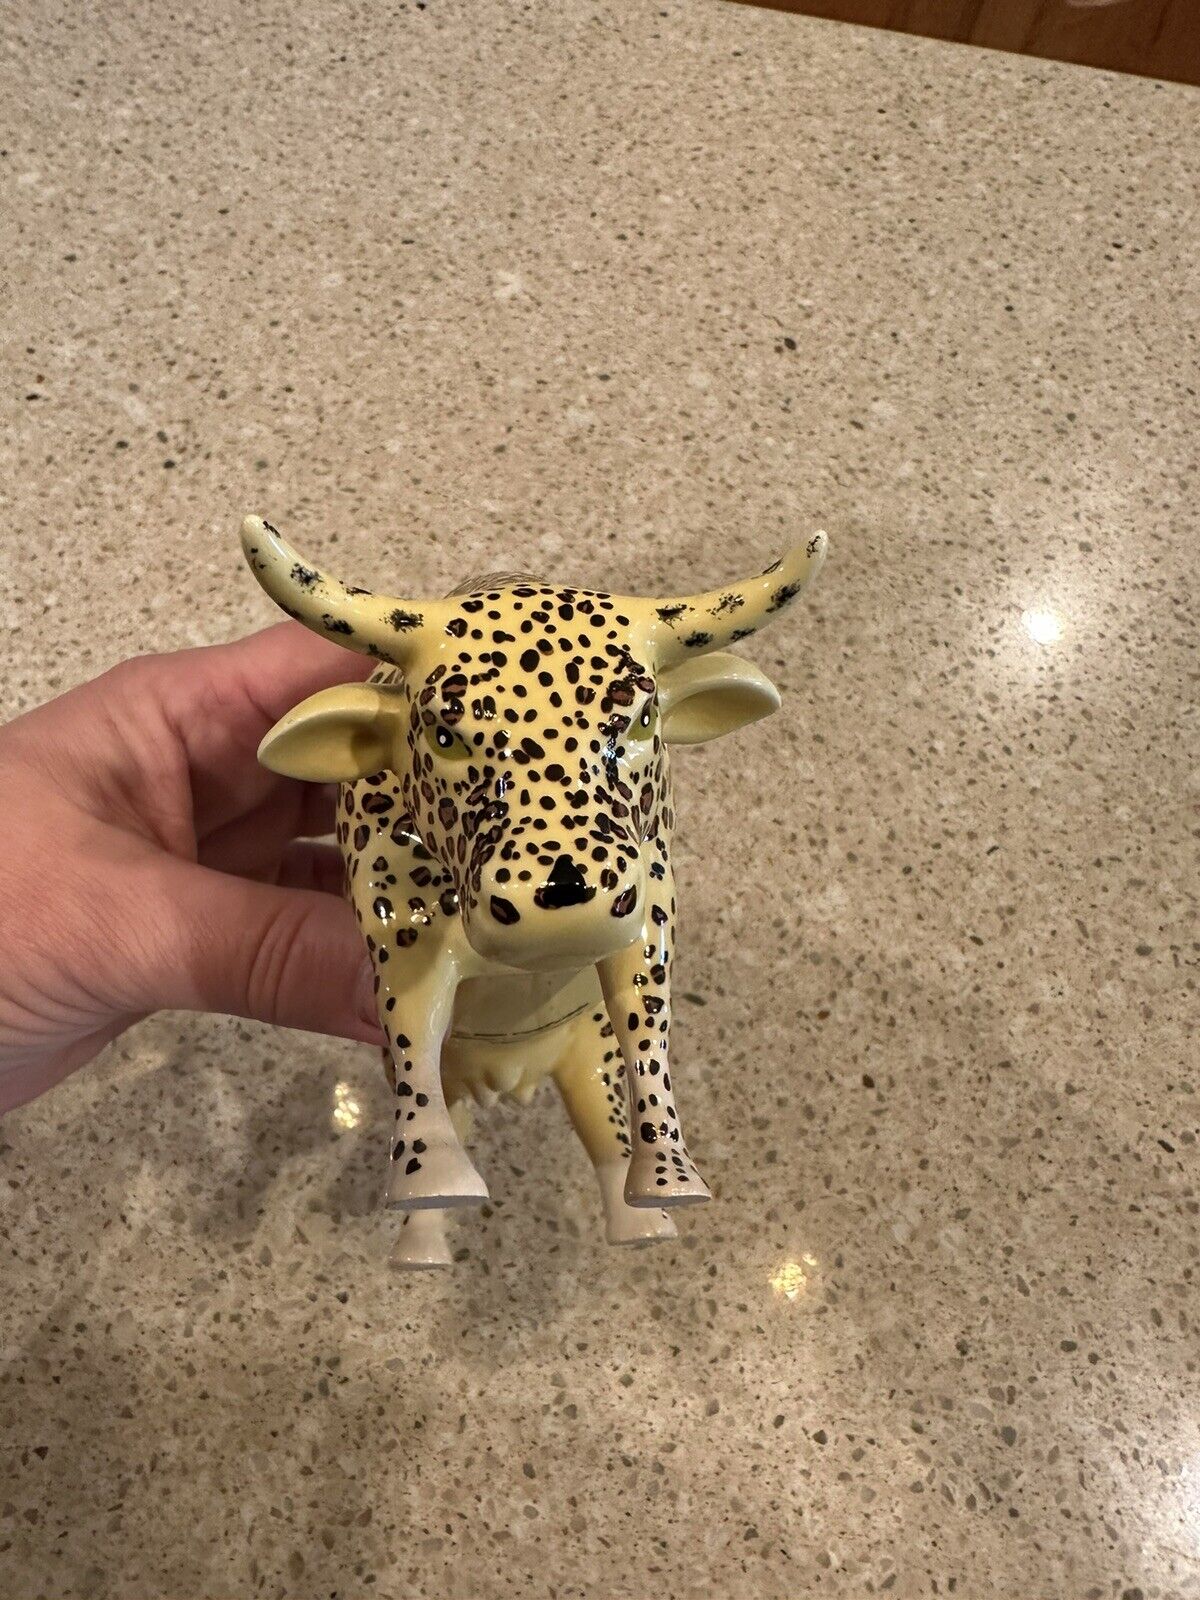 Cow Parade Leopard Cow Figurine No Box No Tag Dated 2000 Collectible